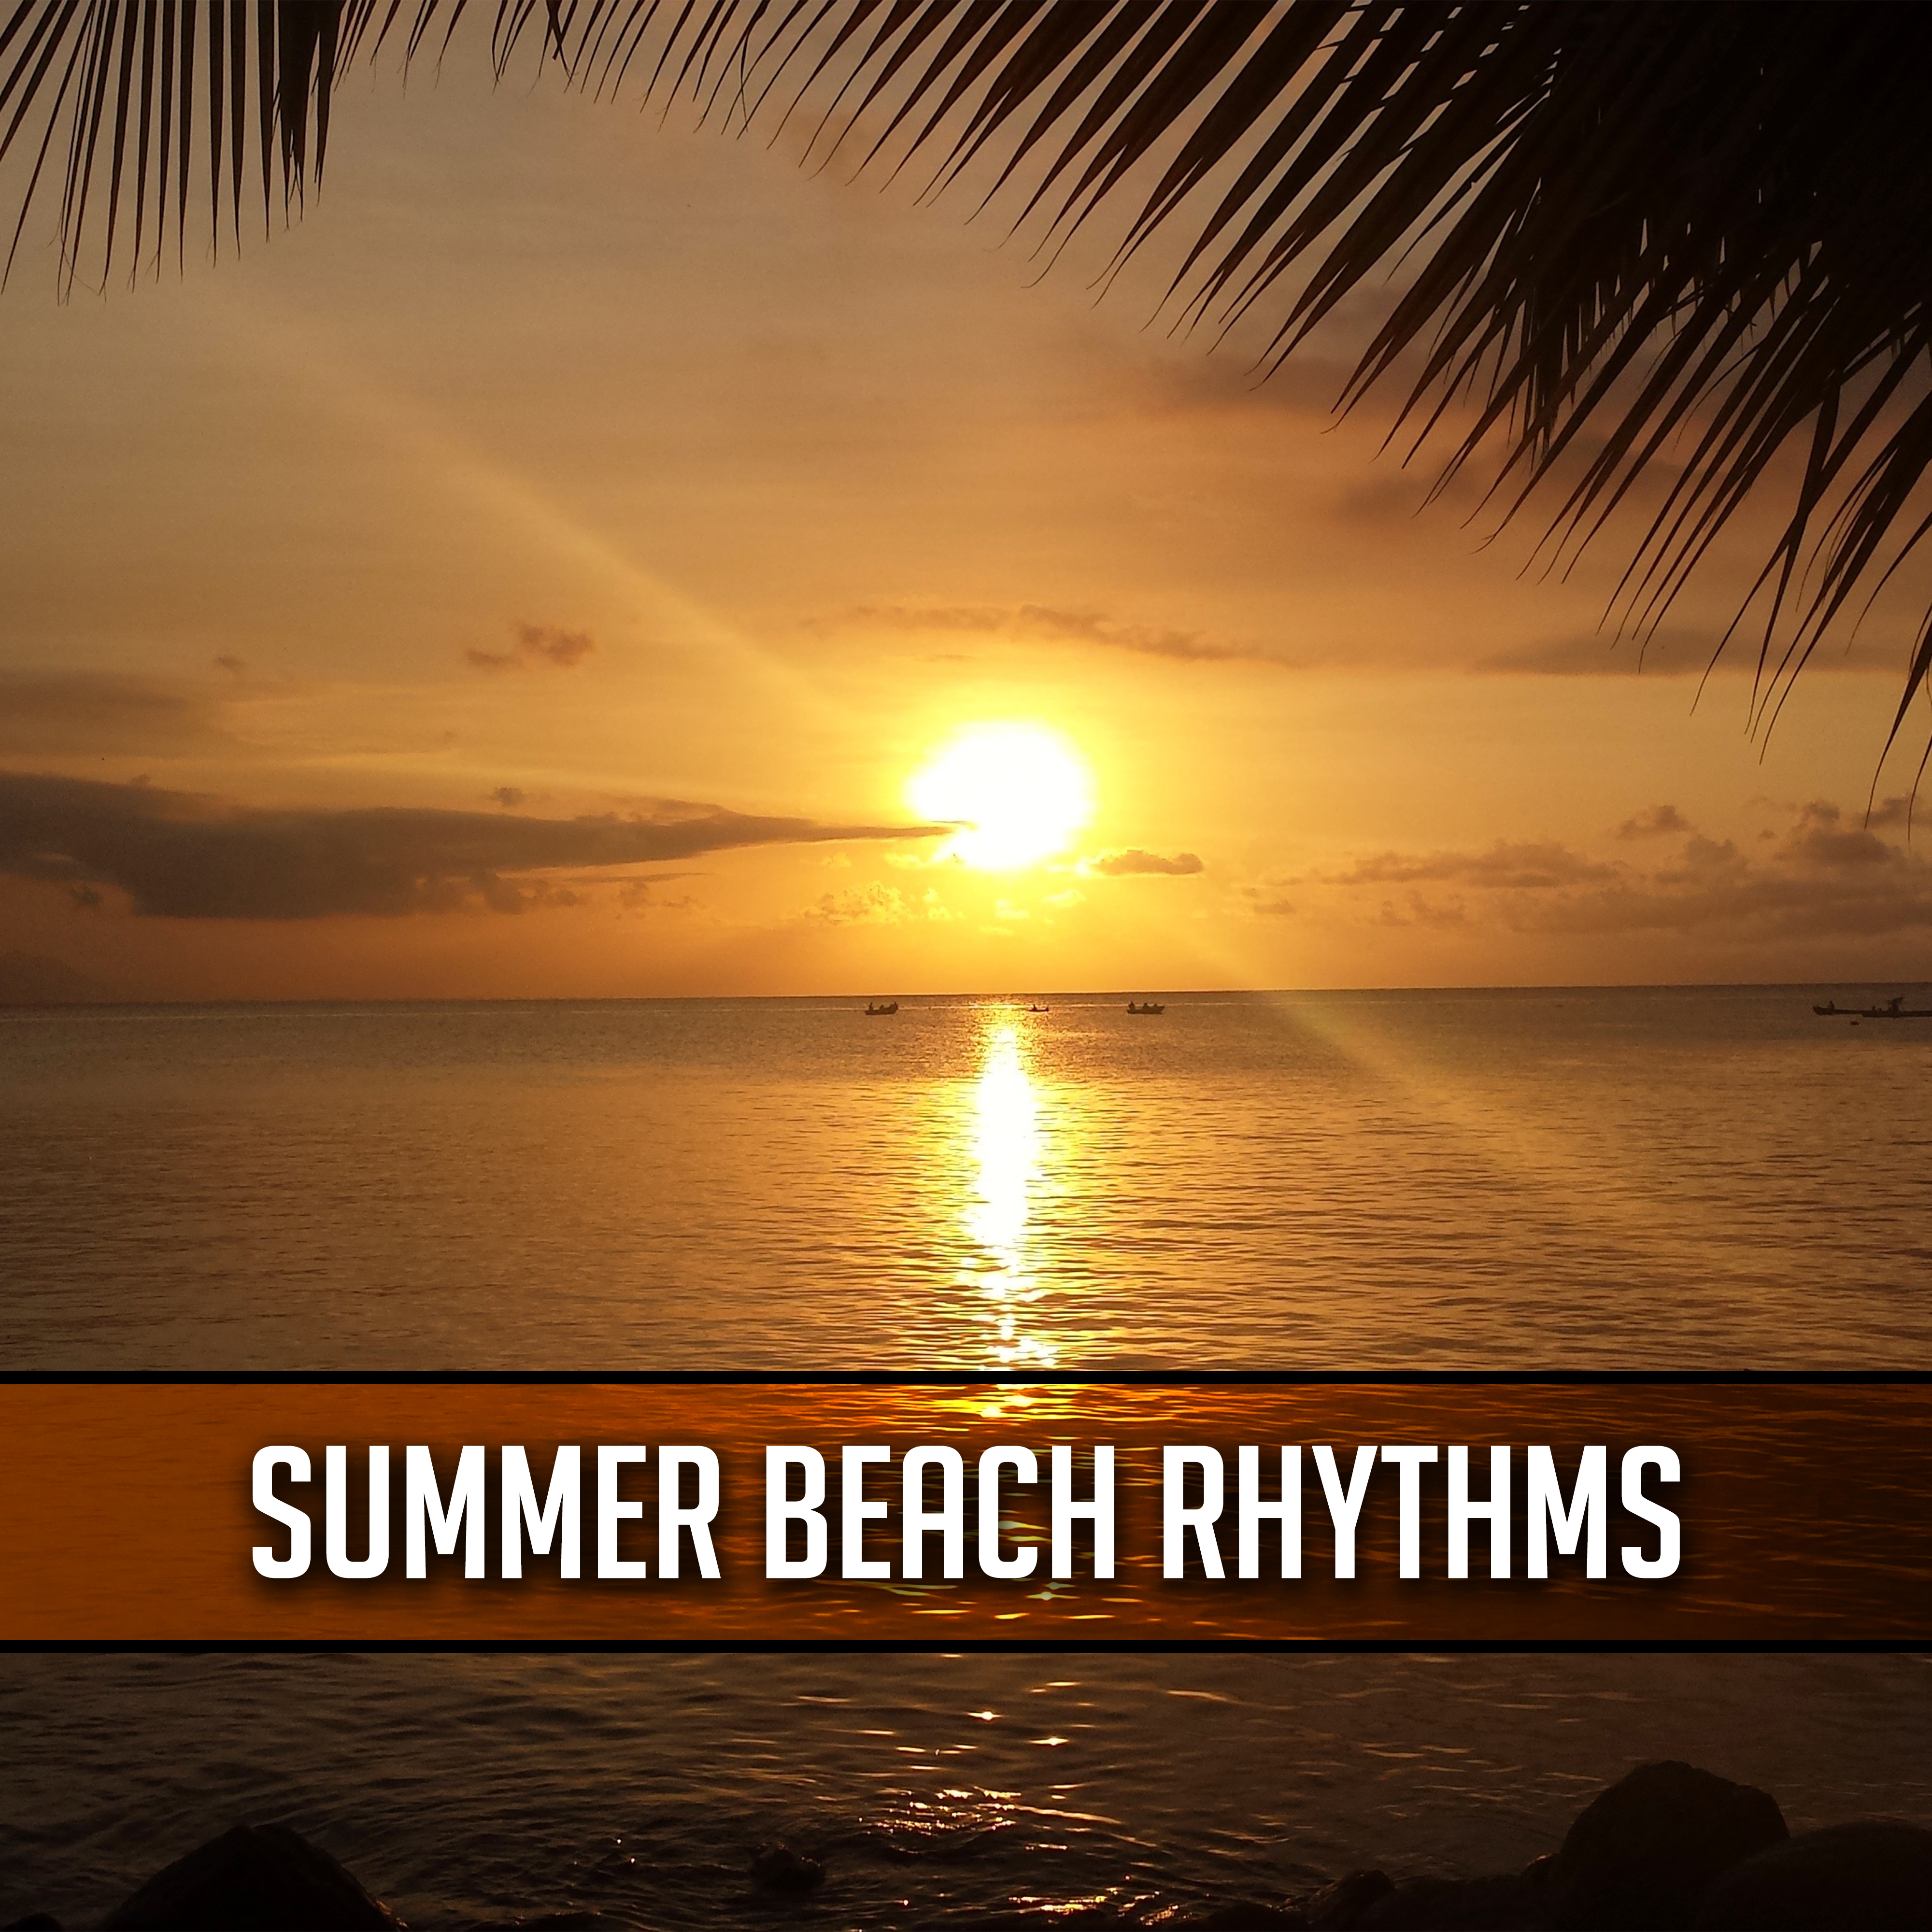 Summer Beach Rhythms – Time to Dance, Easy Listening, Stress Relief, Peaceful Music